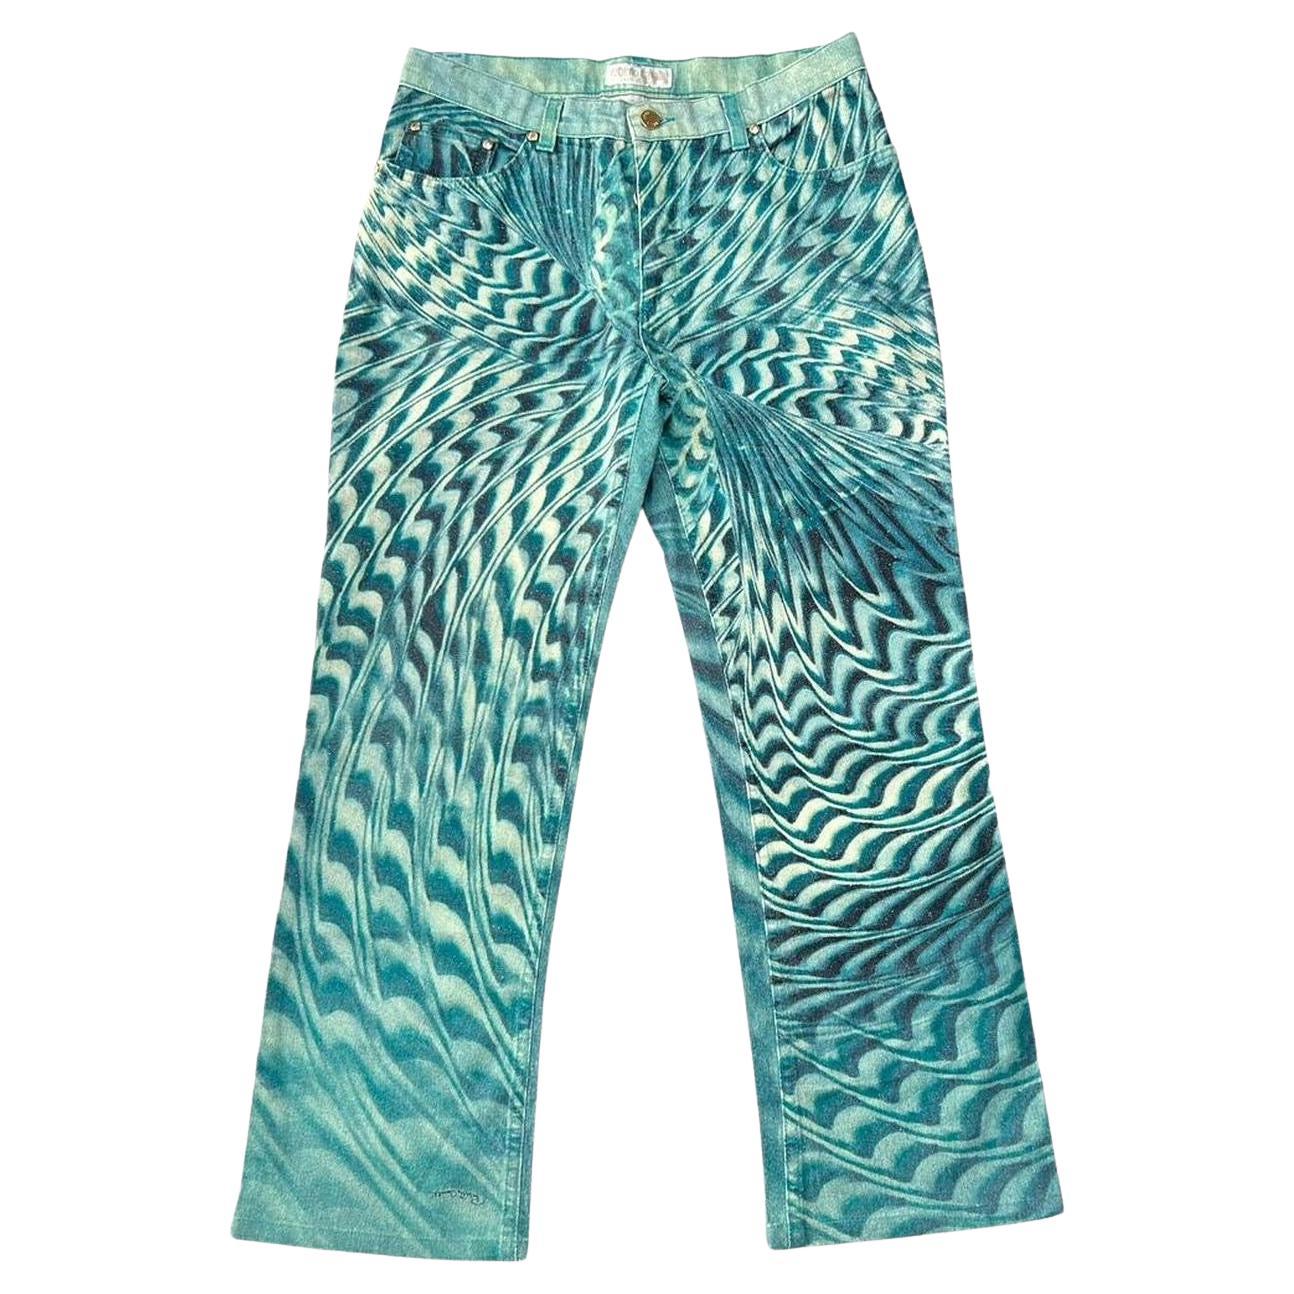 2001 Roberto Cavalli Teal Blue Psychedelic Print Cotton Twill Pants For ...